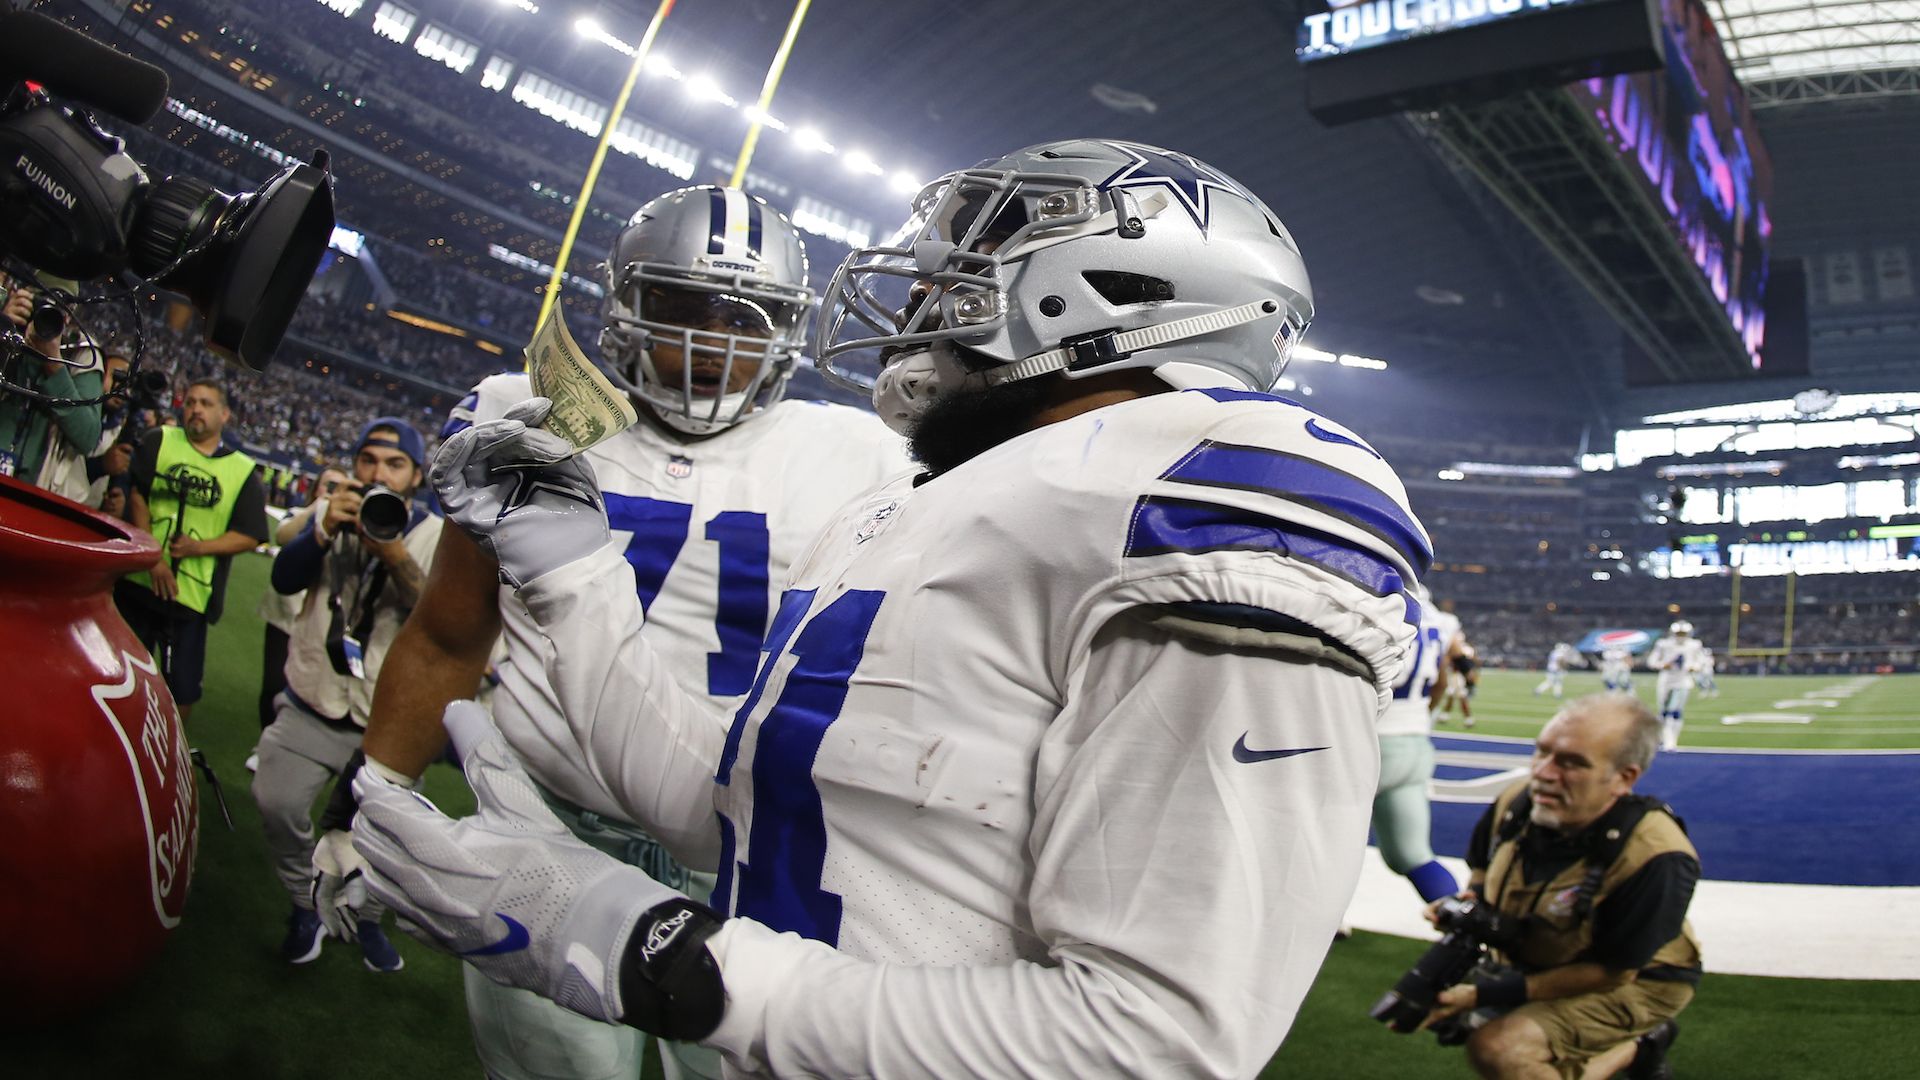 Ezekiel Elliott Celebrated A Touchdown By Donating $21 To The Salvation Army Kettle